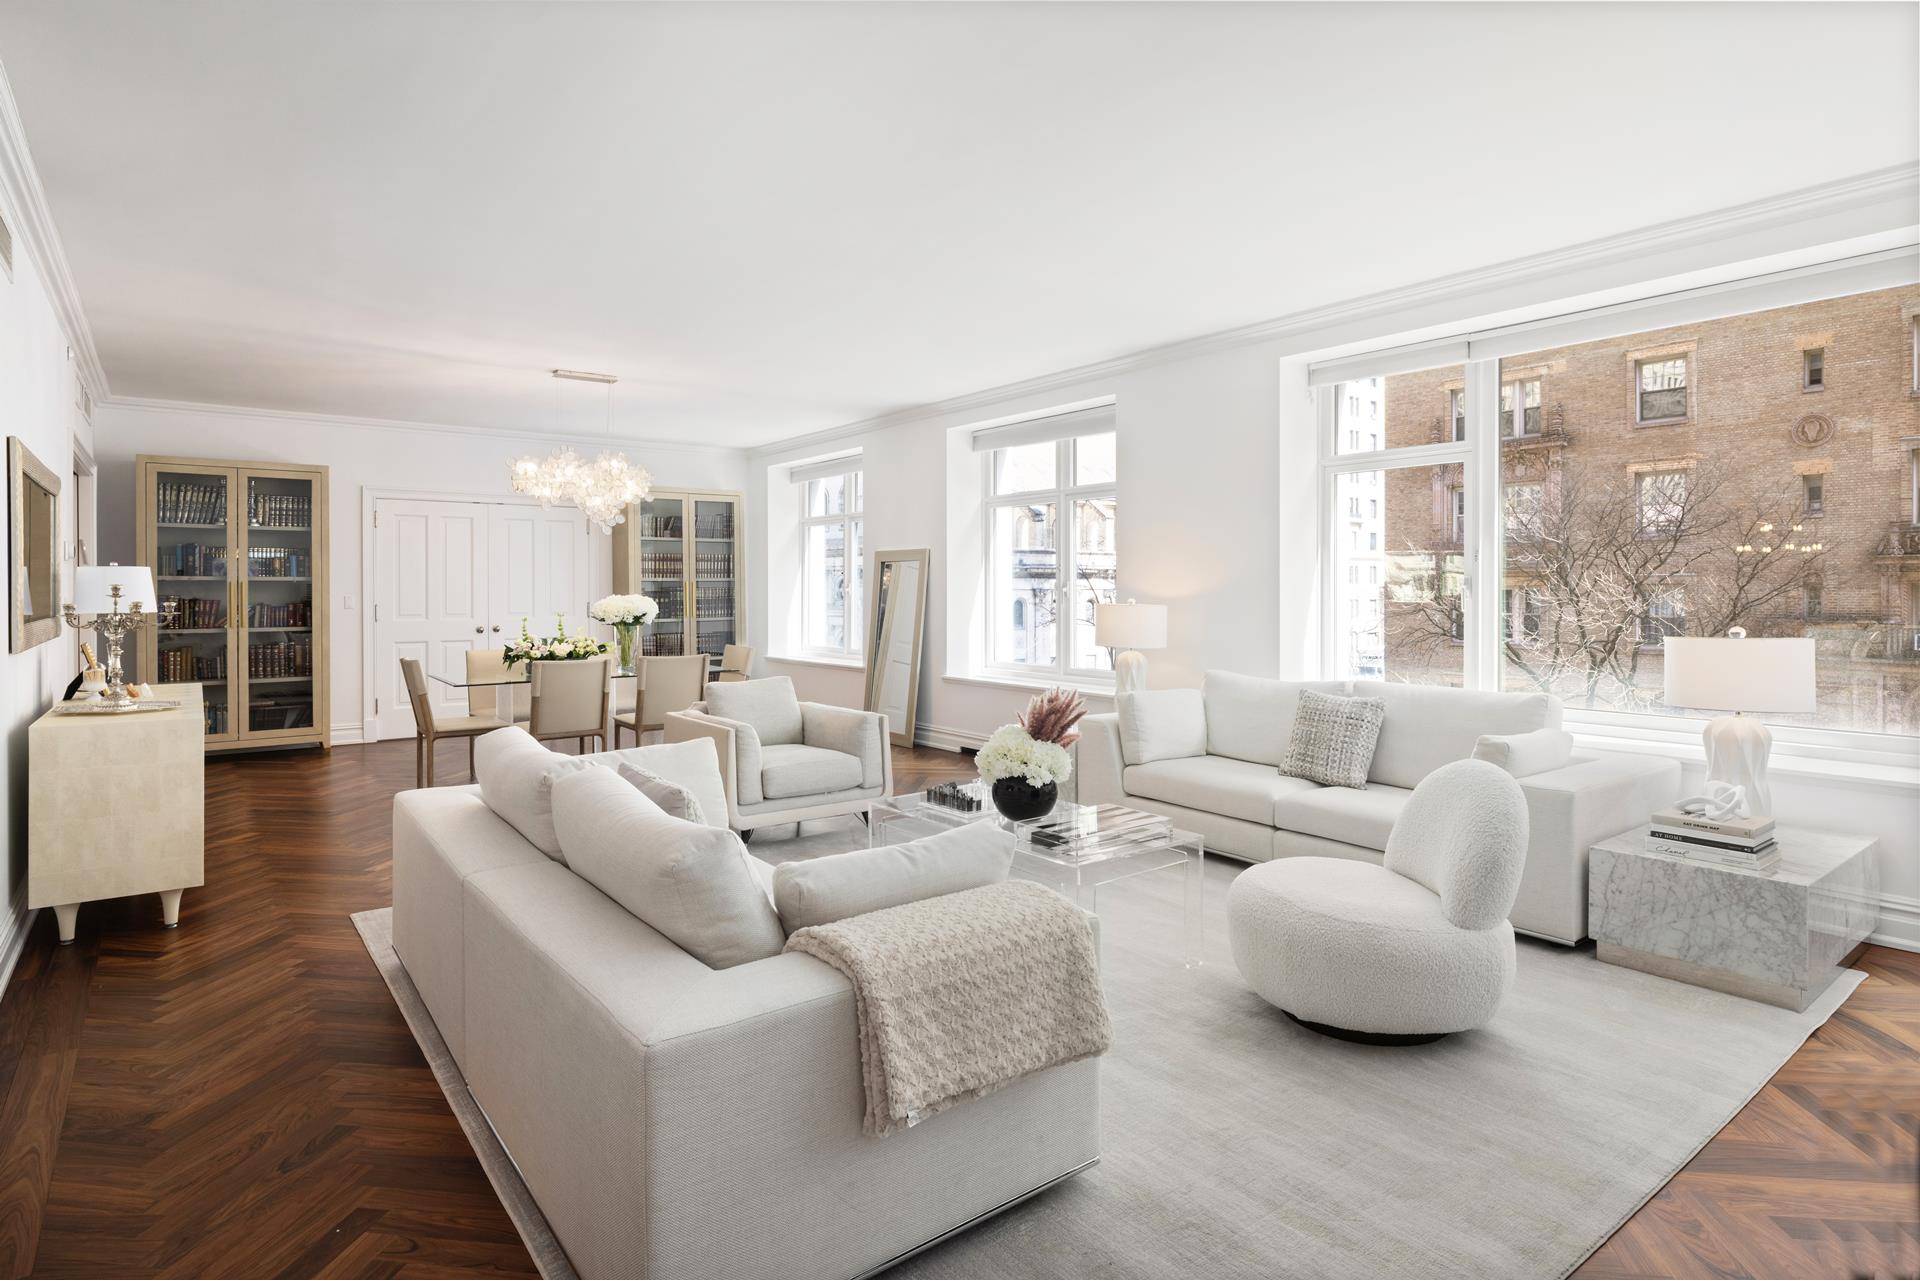 NEW PRICE ! This stunning half floor residence has the charm and sensibility of a prewar cooperative, with all of the modern conveniences of new construction.